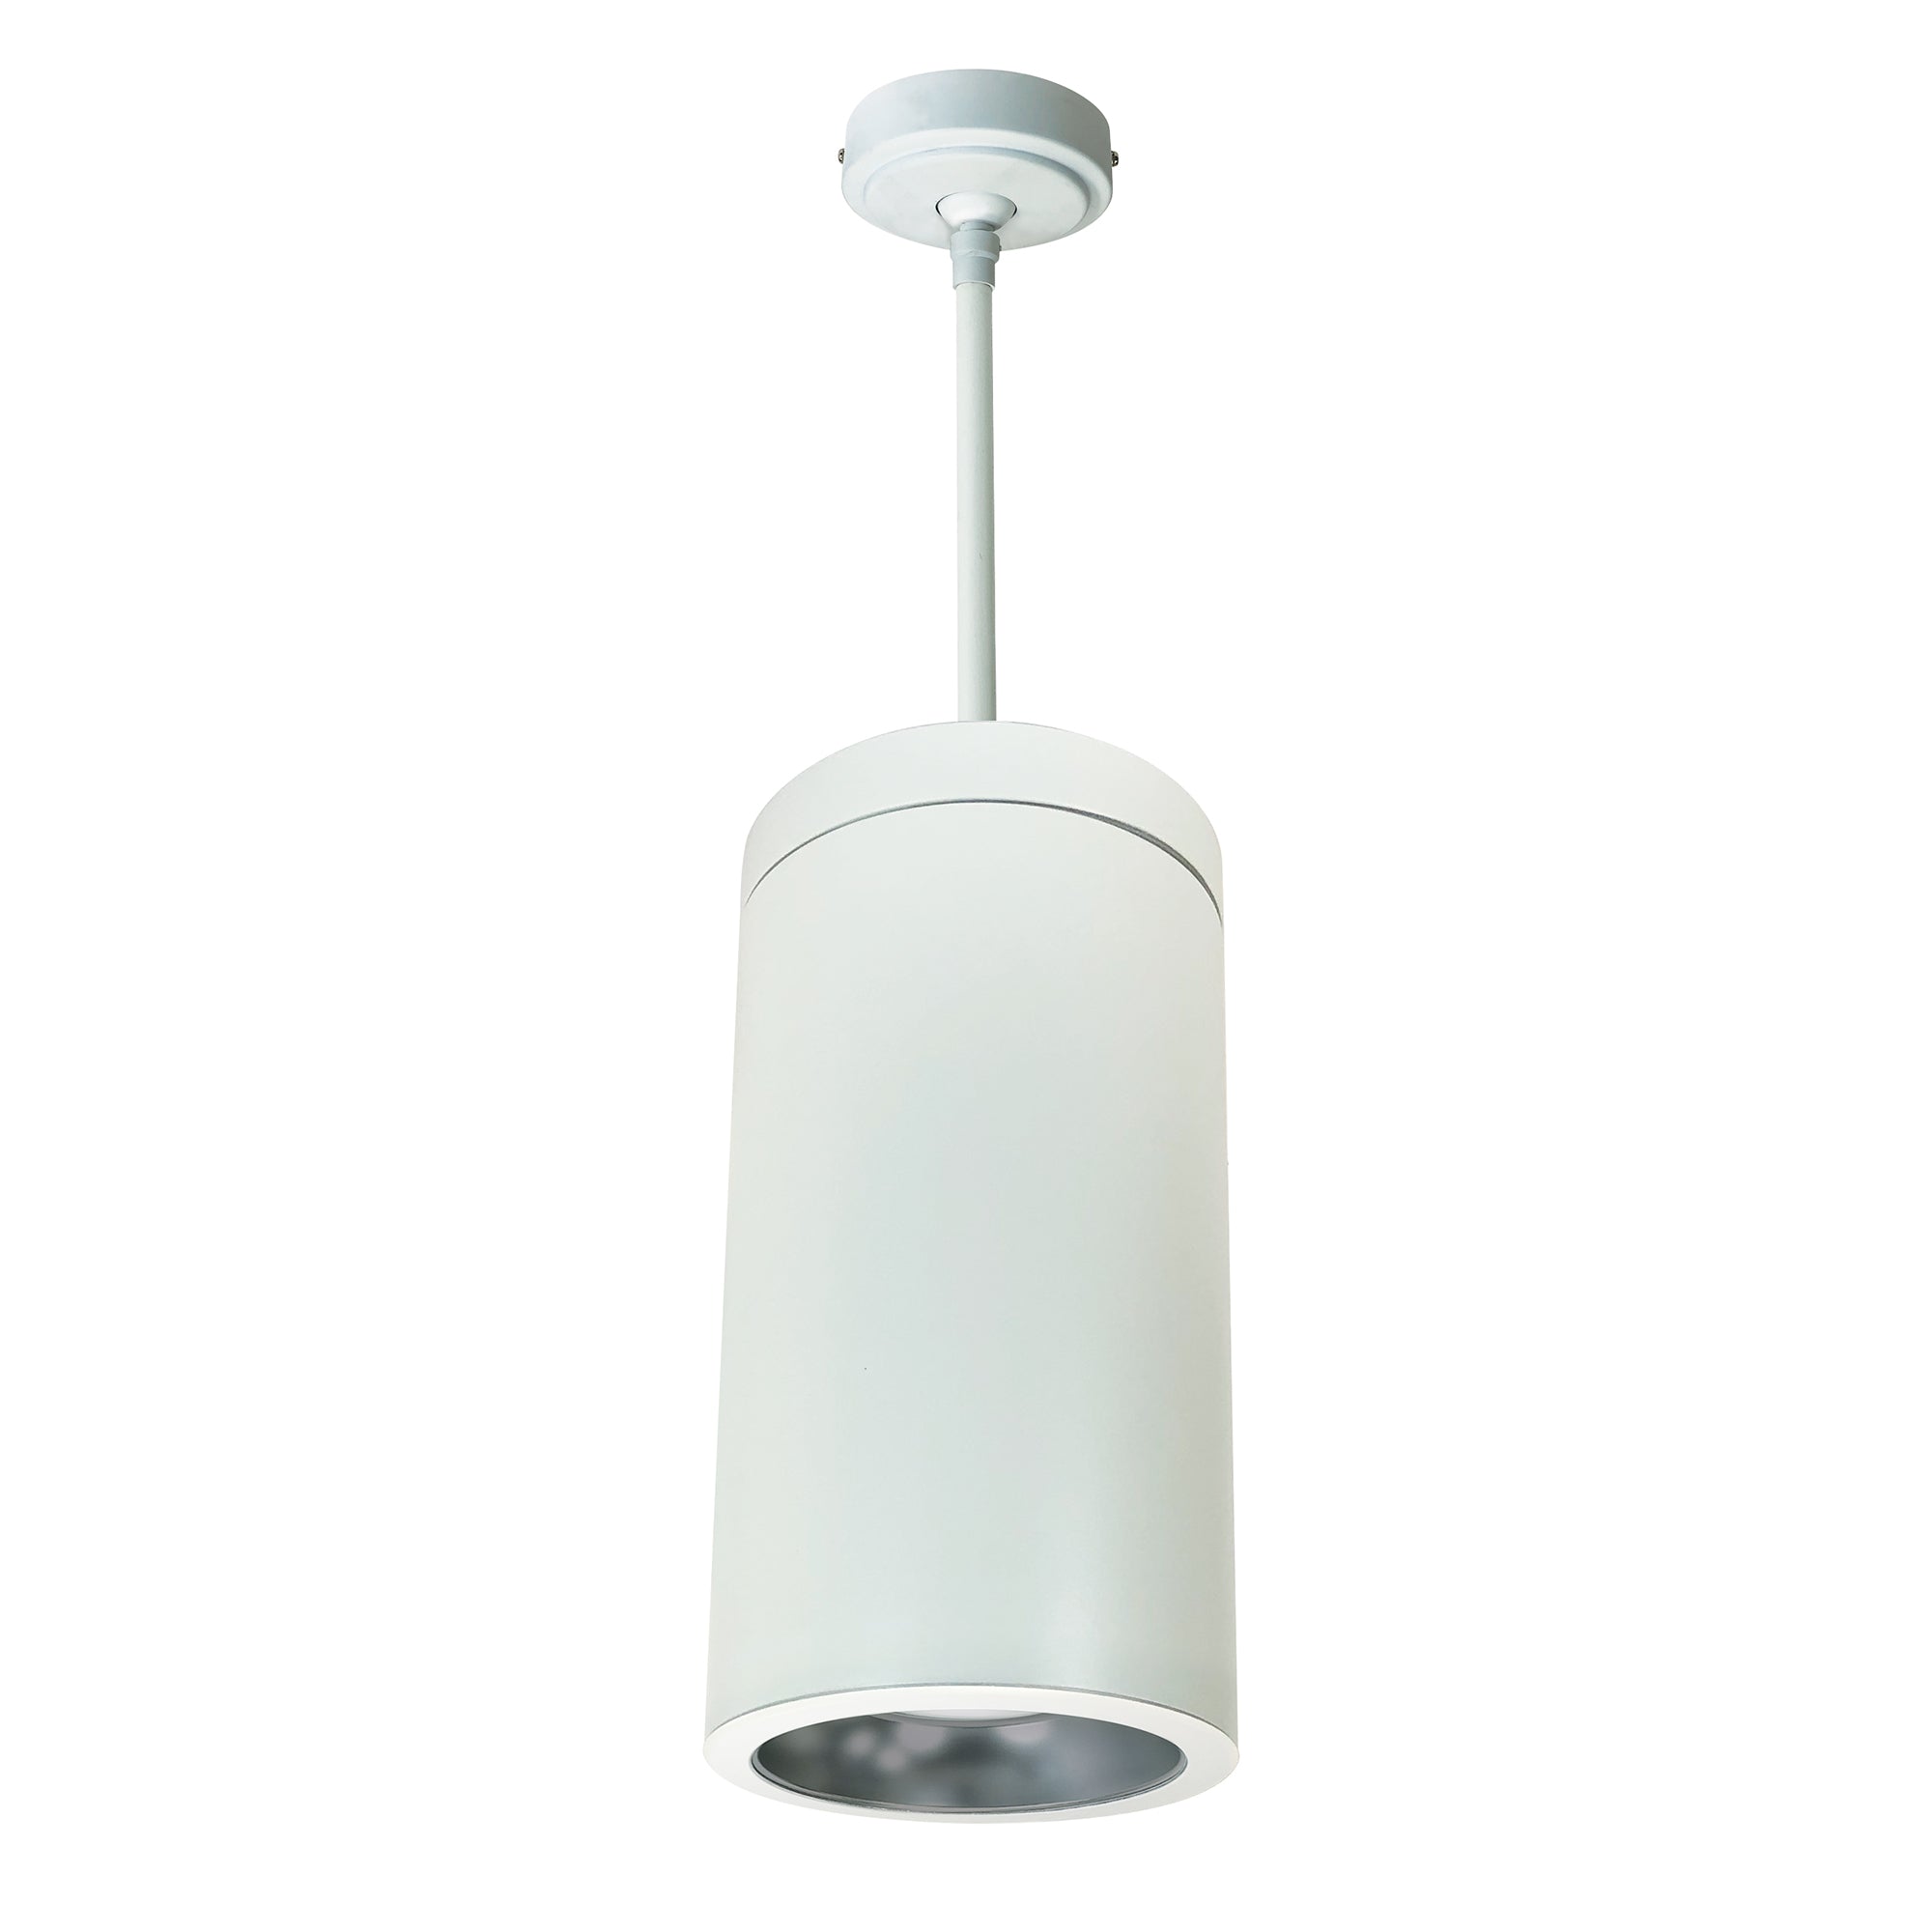 Nora Lighting NYLD2-6P10140DWW - Cylinder - 6 Inch Cobalt Pendant Mount Cylinder, White, 1000L, 4000K, Diffused/White Reflector, 120V Triac/ELV Dimming